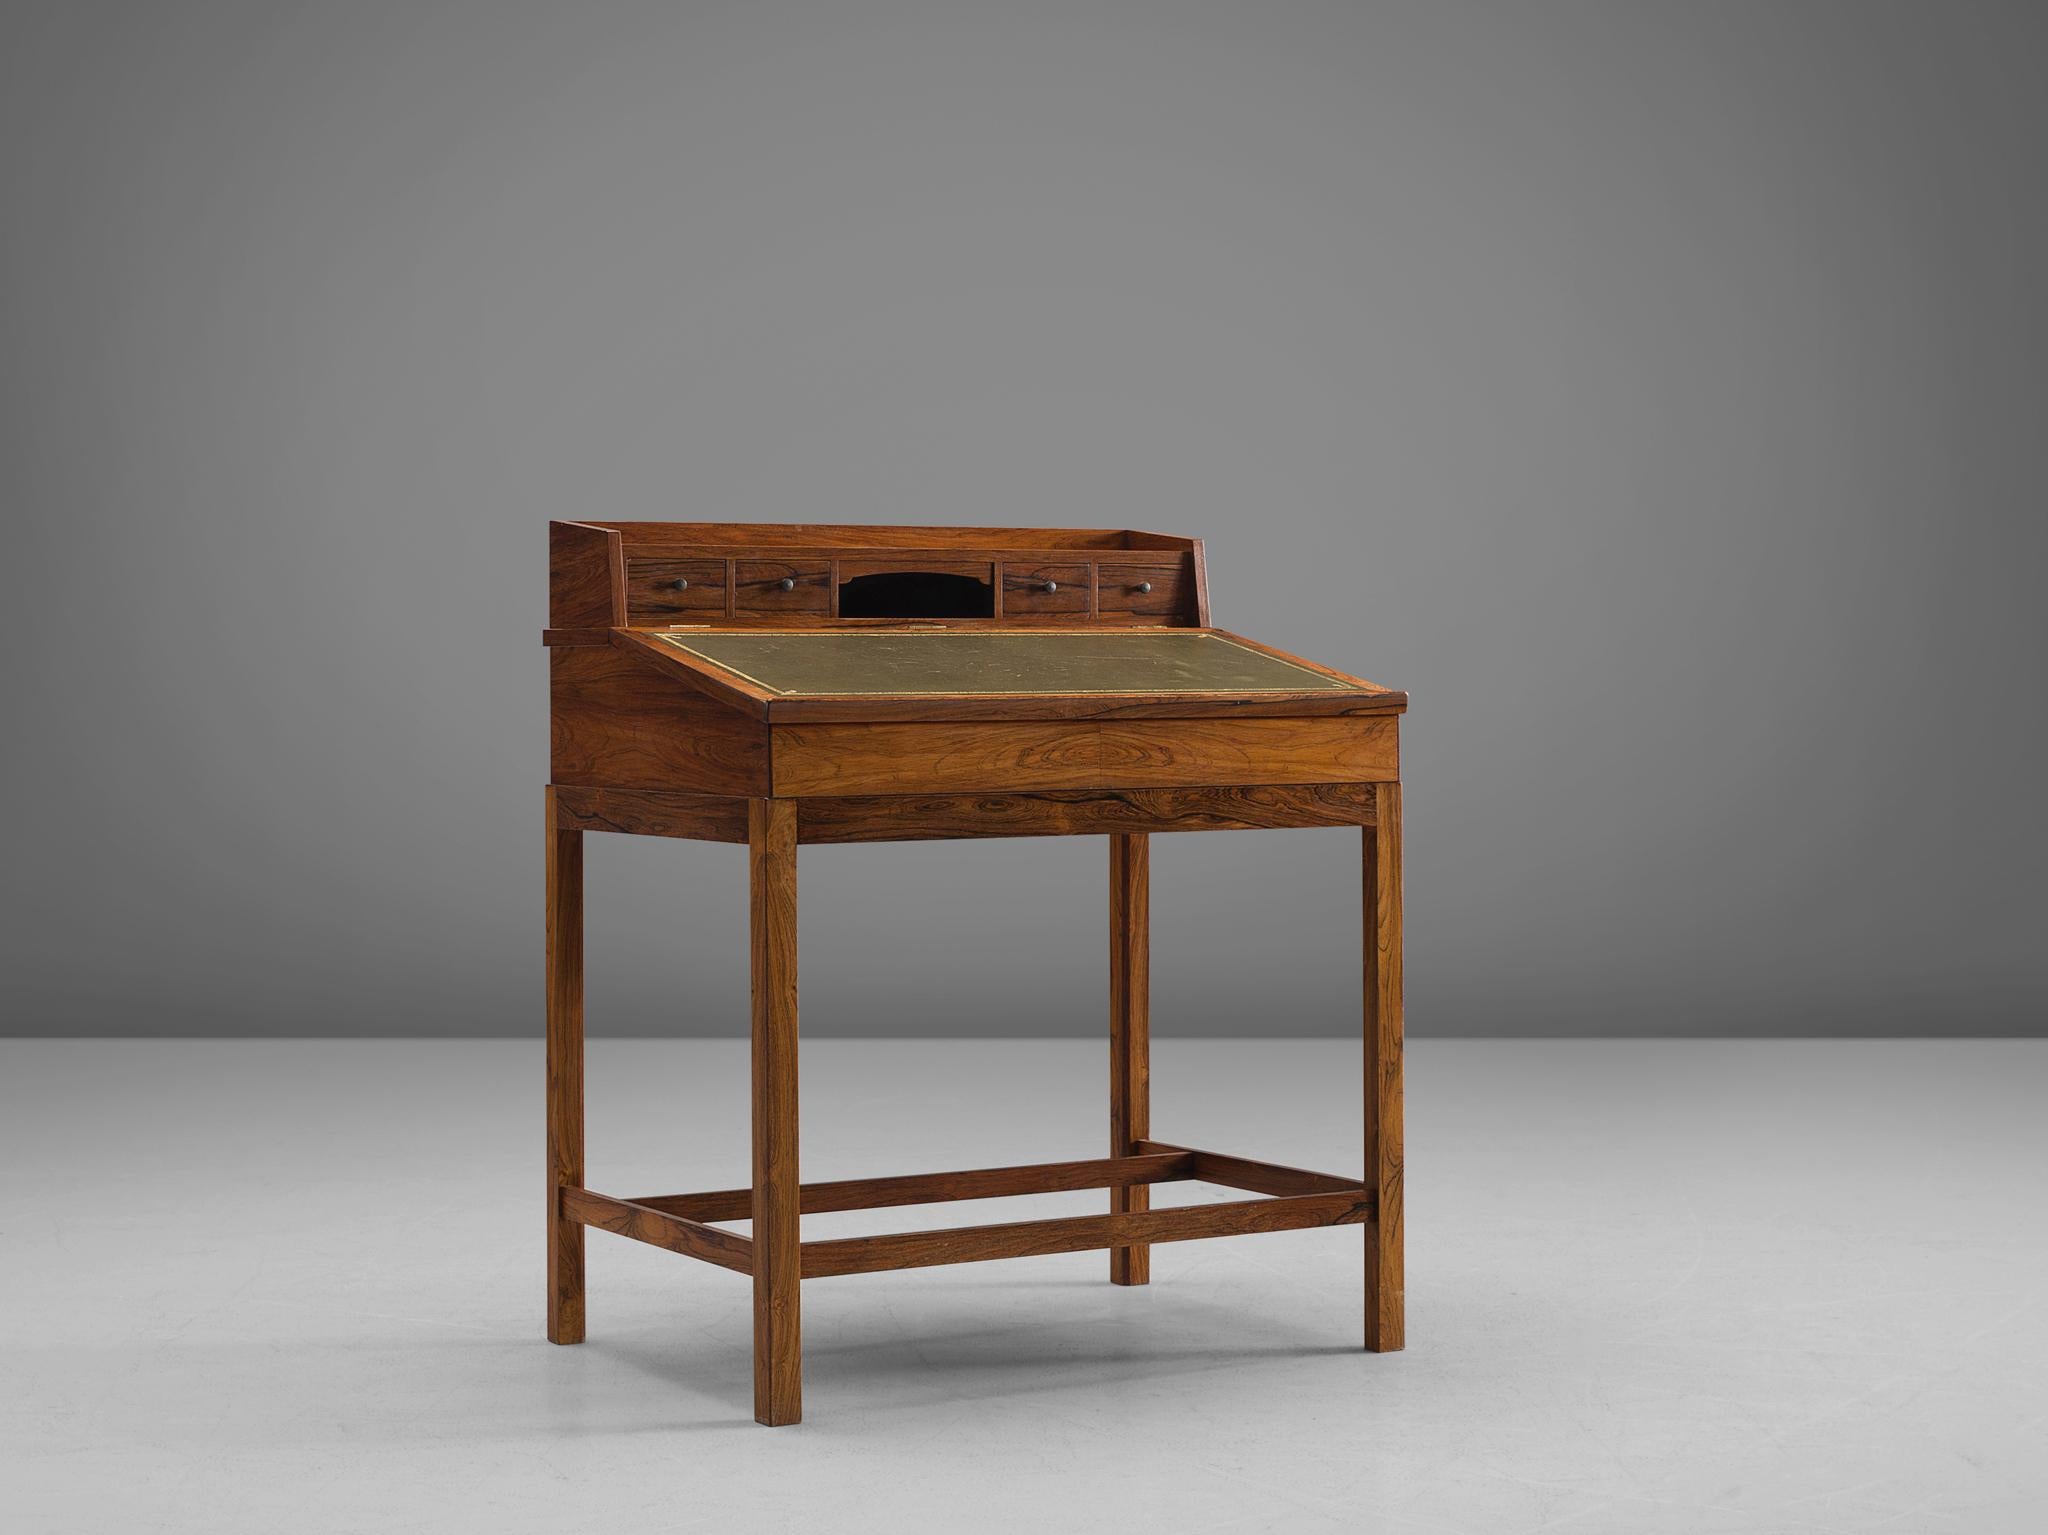 Secretaire, rosewood with olive green leather inlay, Denmark, 1940s

This Danish writing table has an inclined writing surface with a green leather inlay and a golden decorative frame. This part can be opened and used for storage. Furthermore four